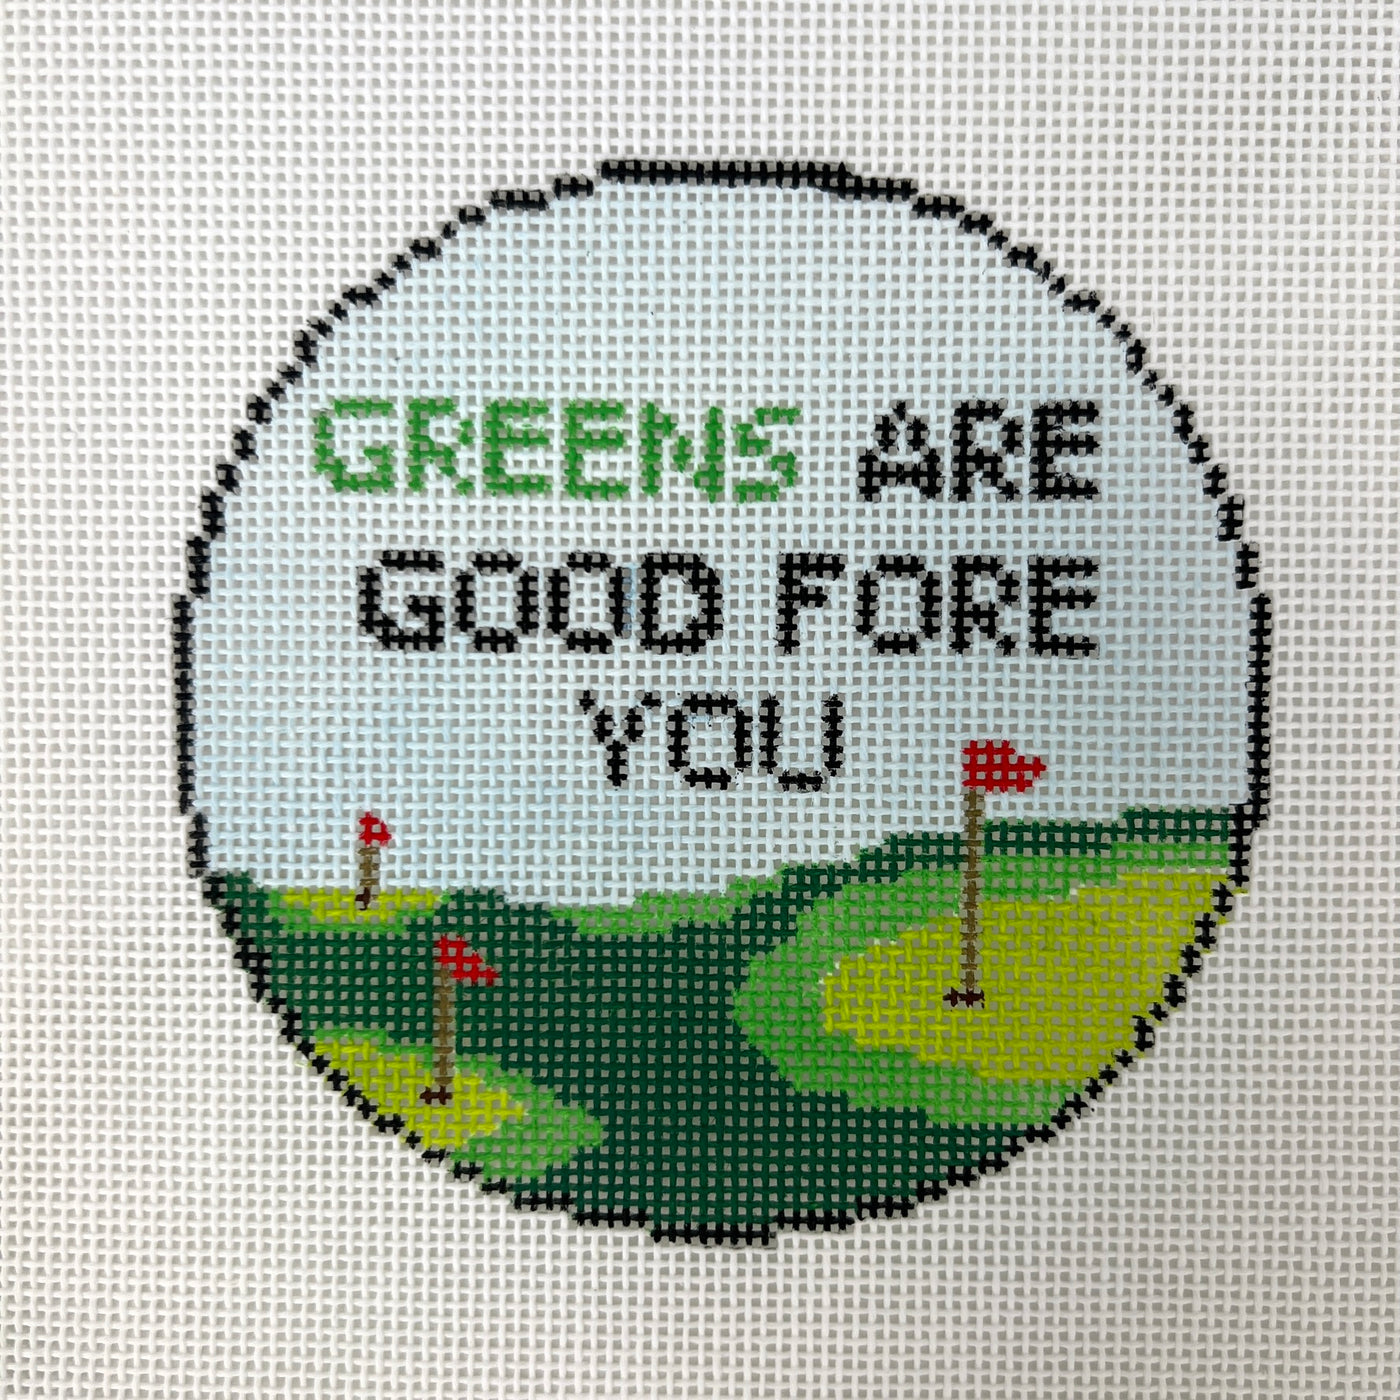 Greens Are Good For You Ornament Needlepoint Canvas